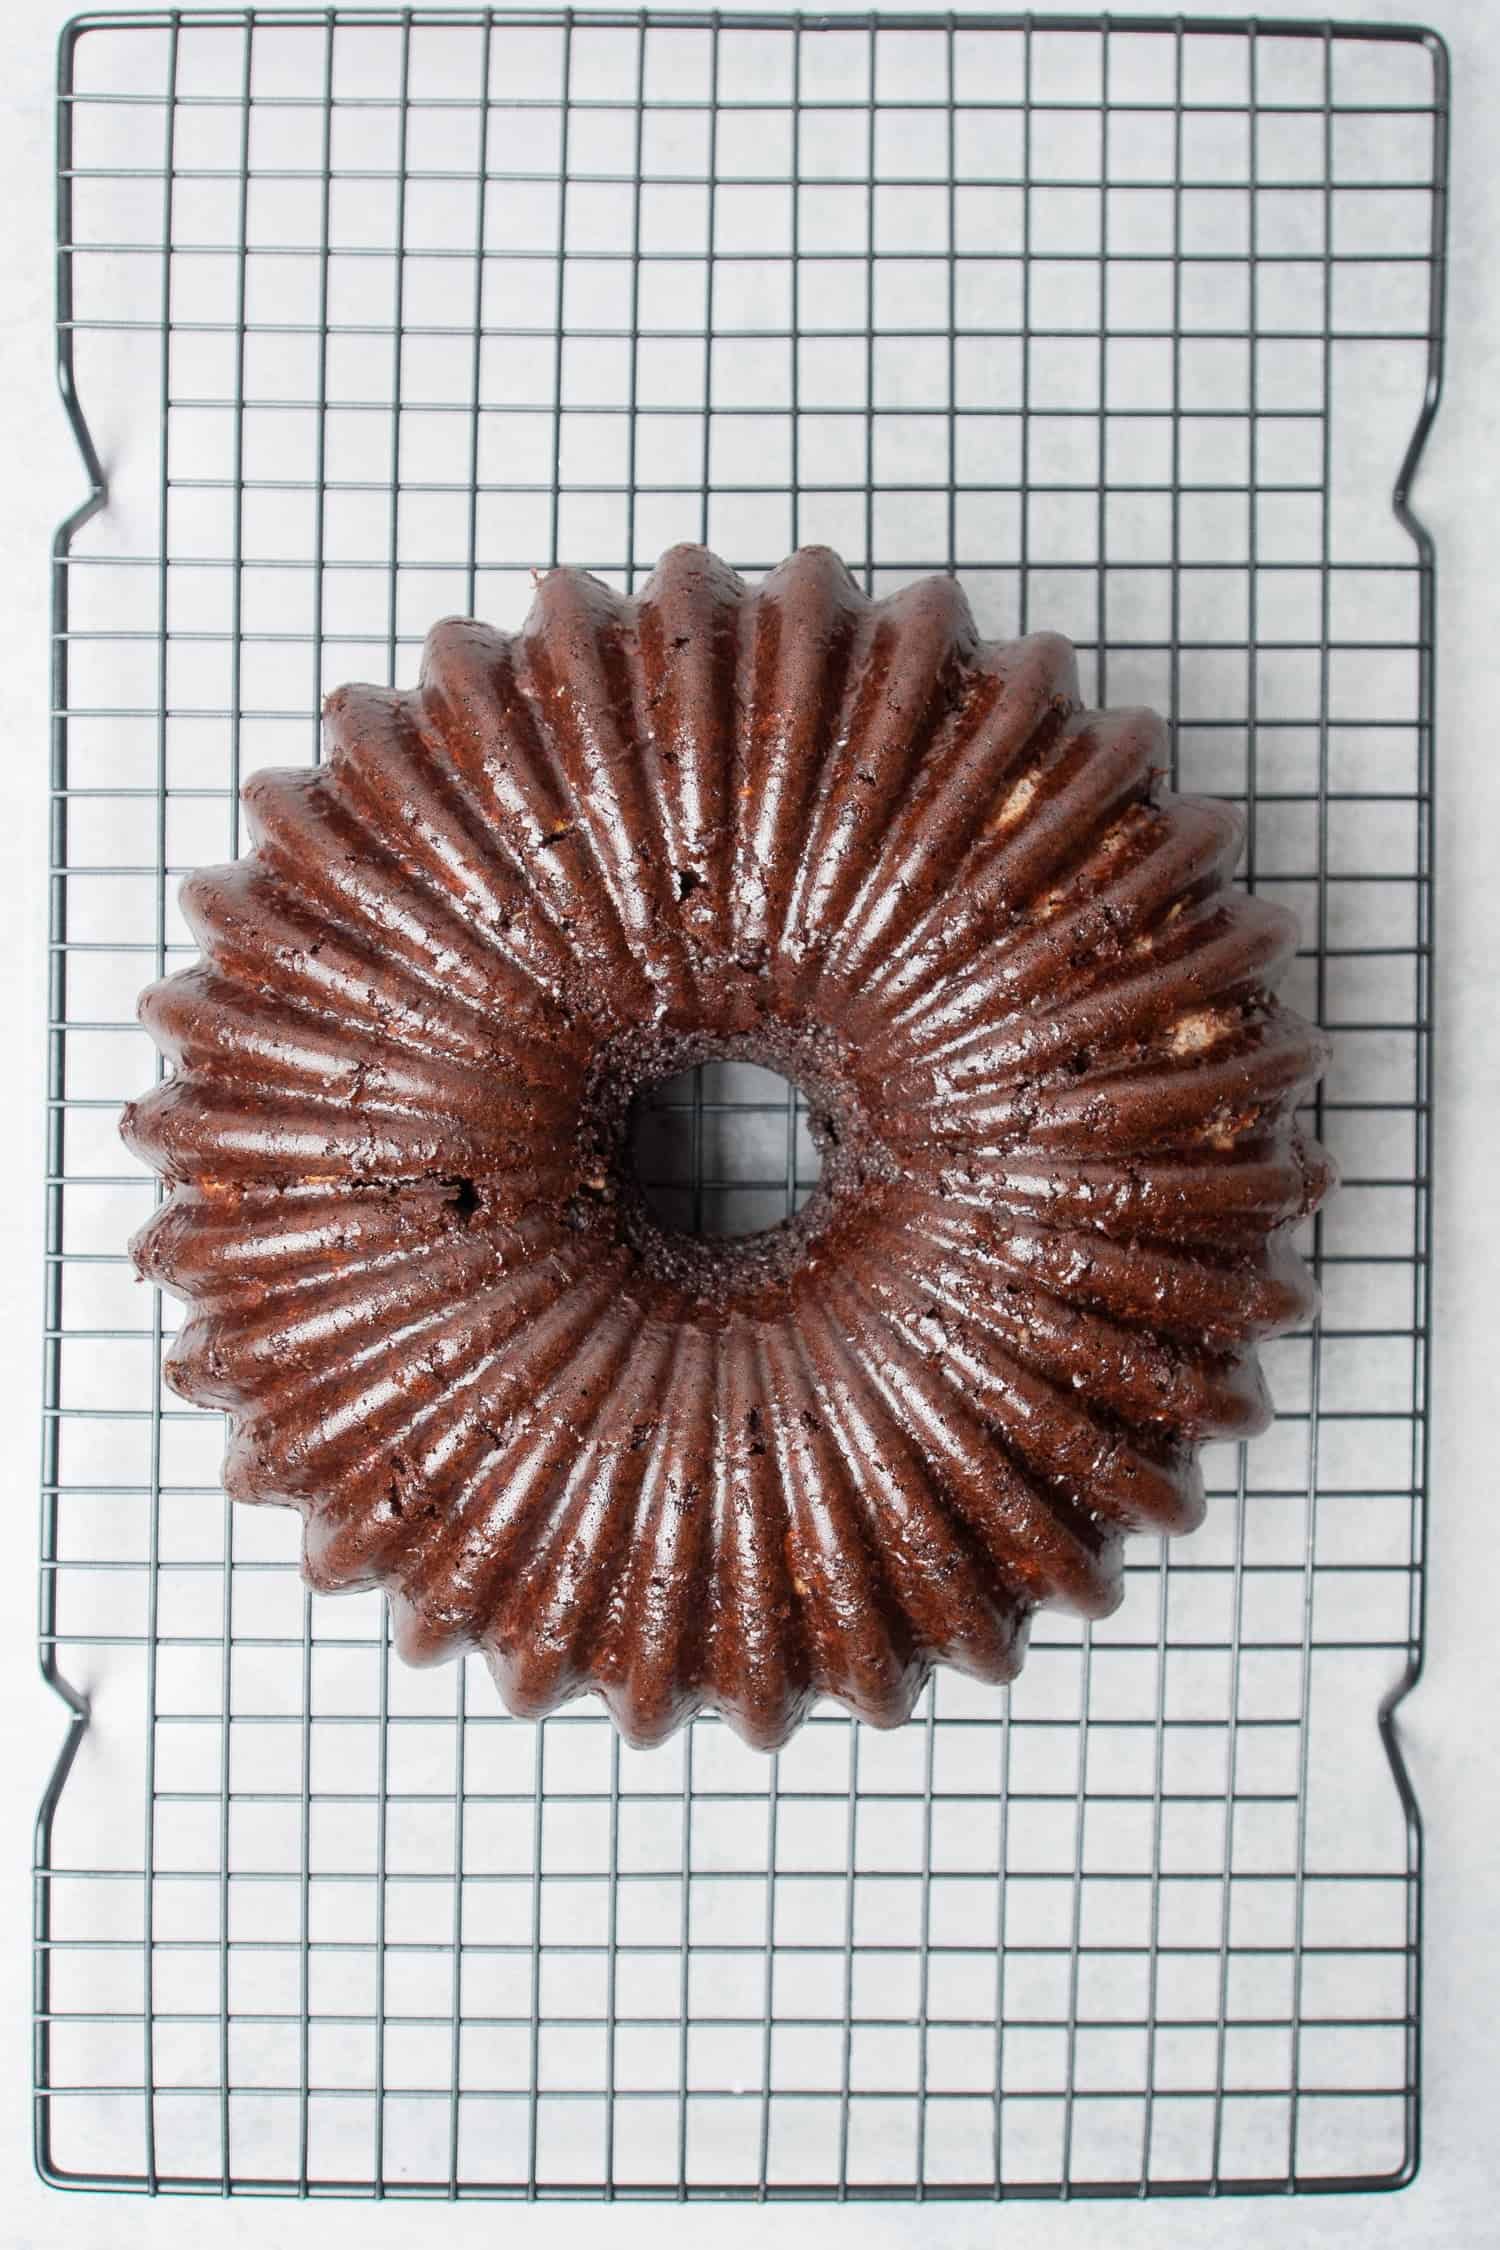 Coconut chocolate bundt cake on a cooling rack.